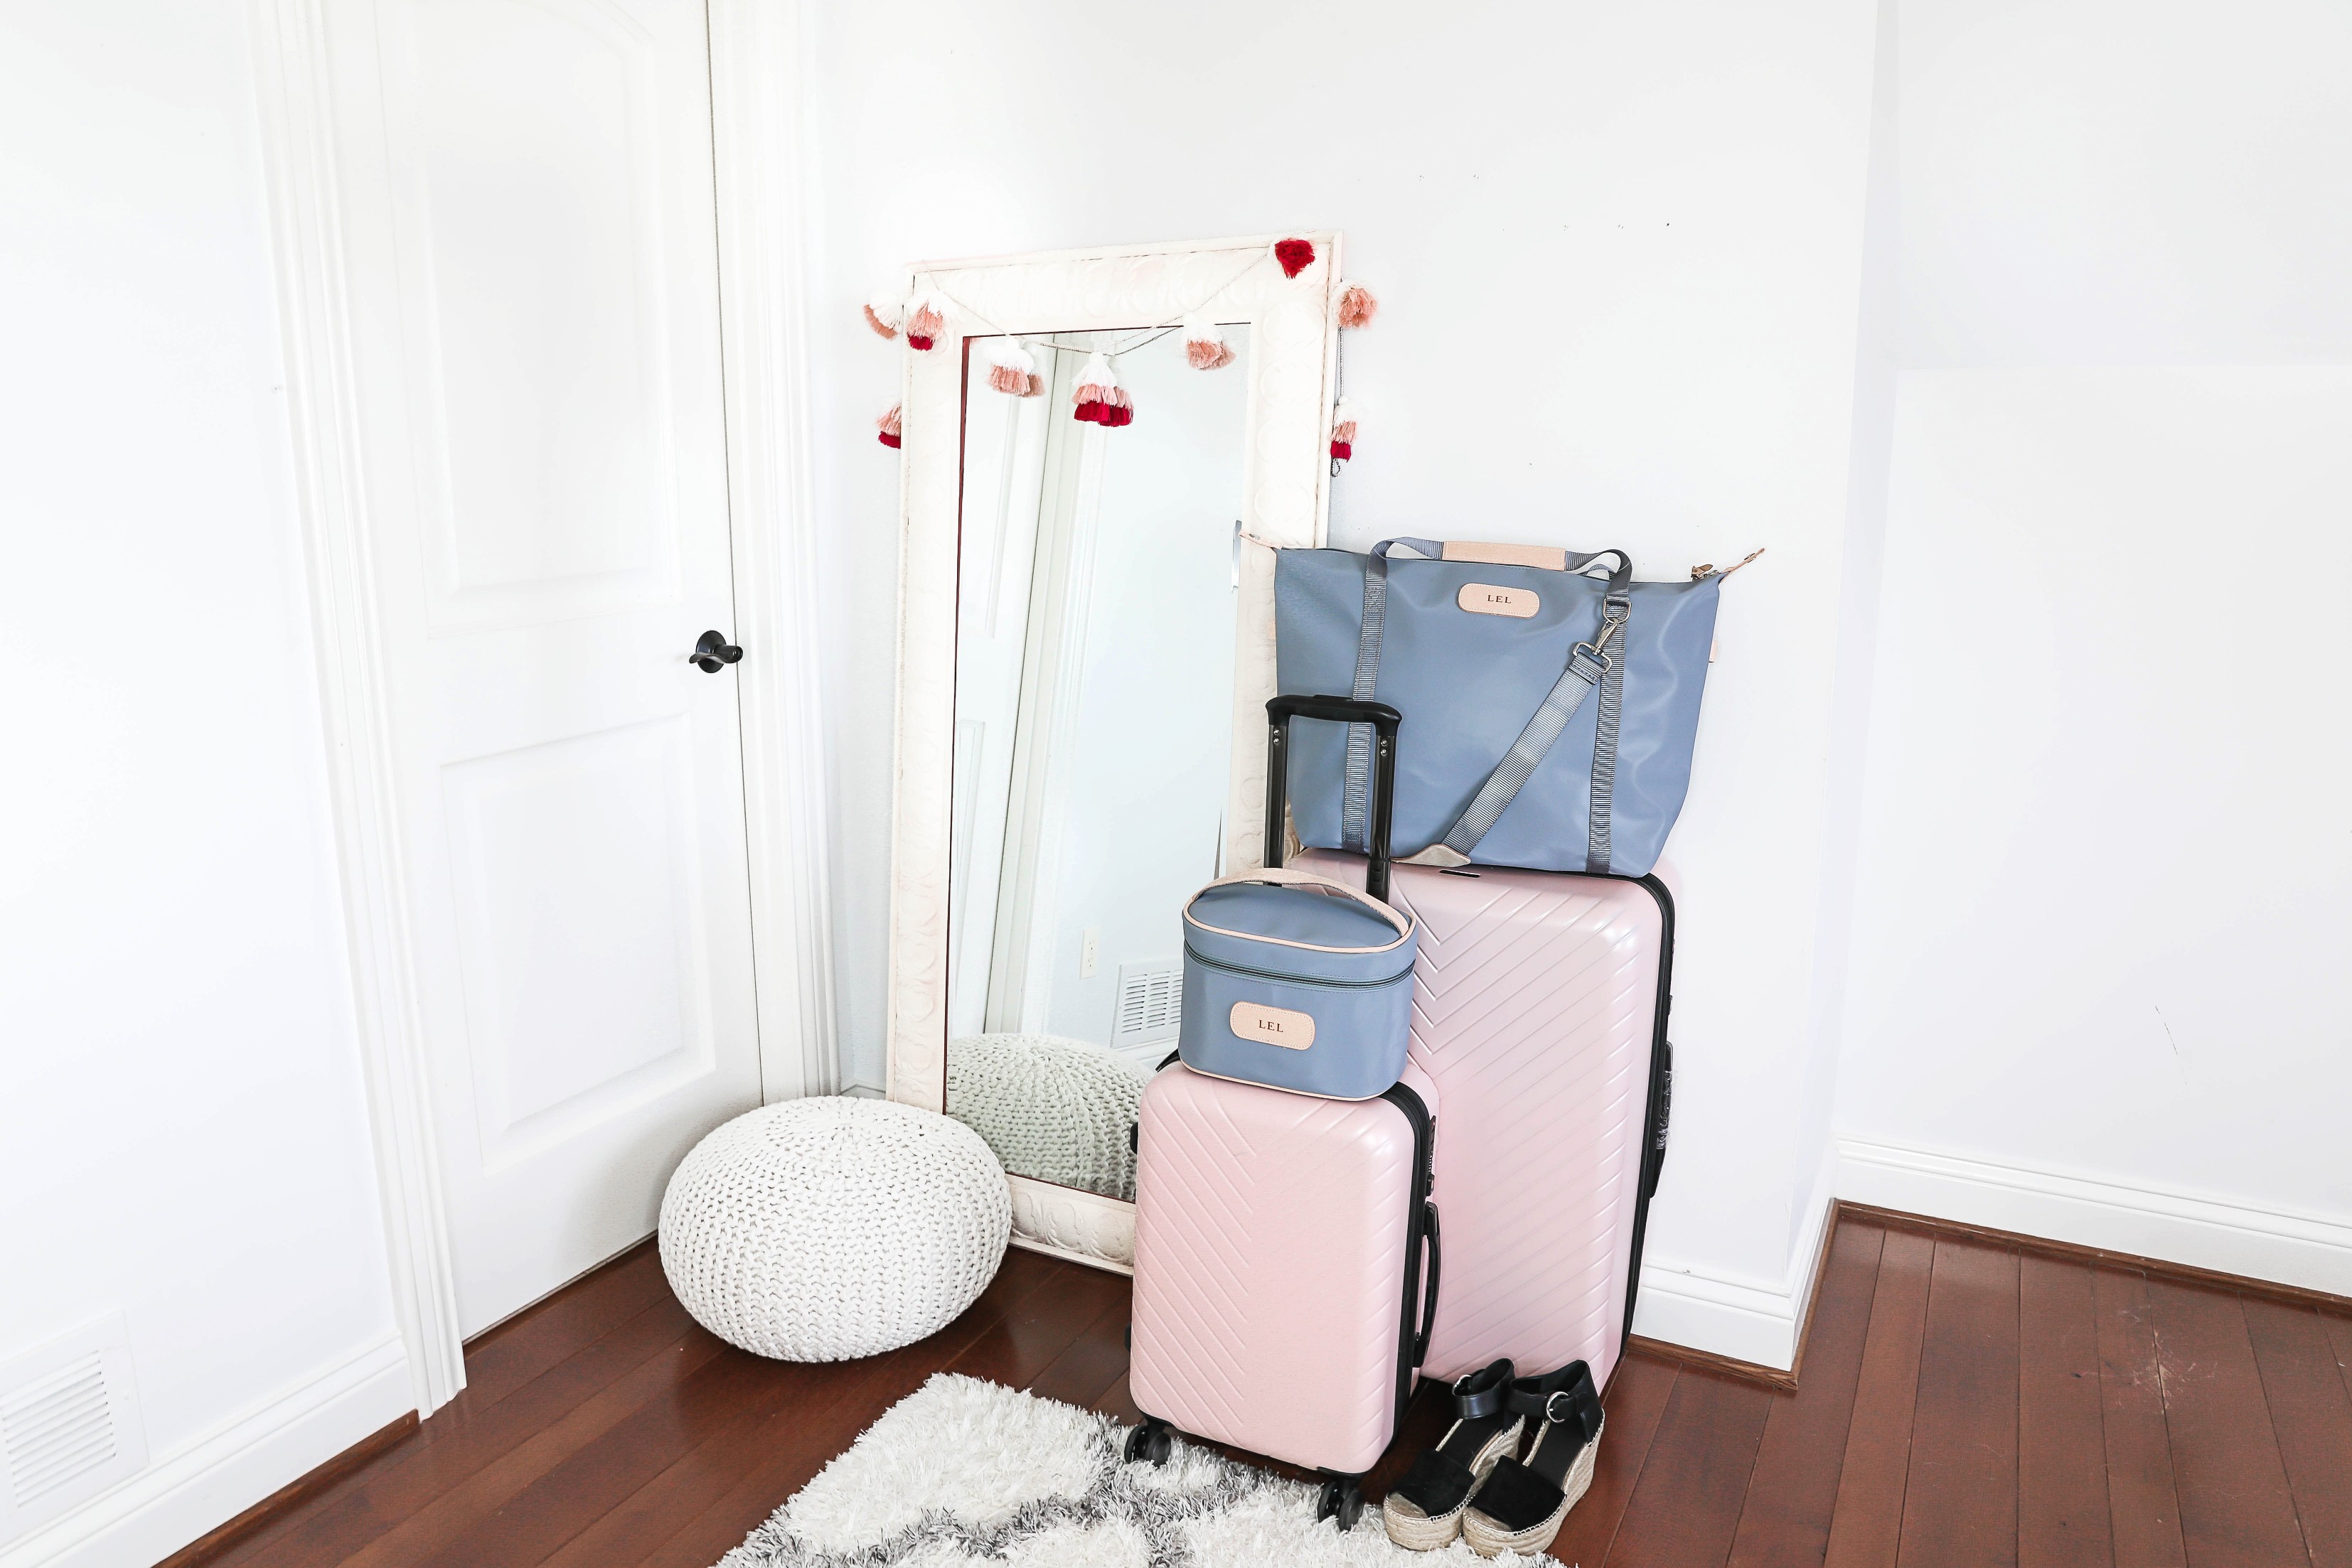 Packing tips for a trip from the queen of overpacking! I use the cutest Nordstrom suitcase and Jon Hart luggage for my trips! Spring break packing with the latest spring trends! How cute are these ugg sneakers, Marc Fisher wedges? Details on fashion blog daily dose of charm by lauren lindmark